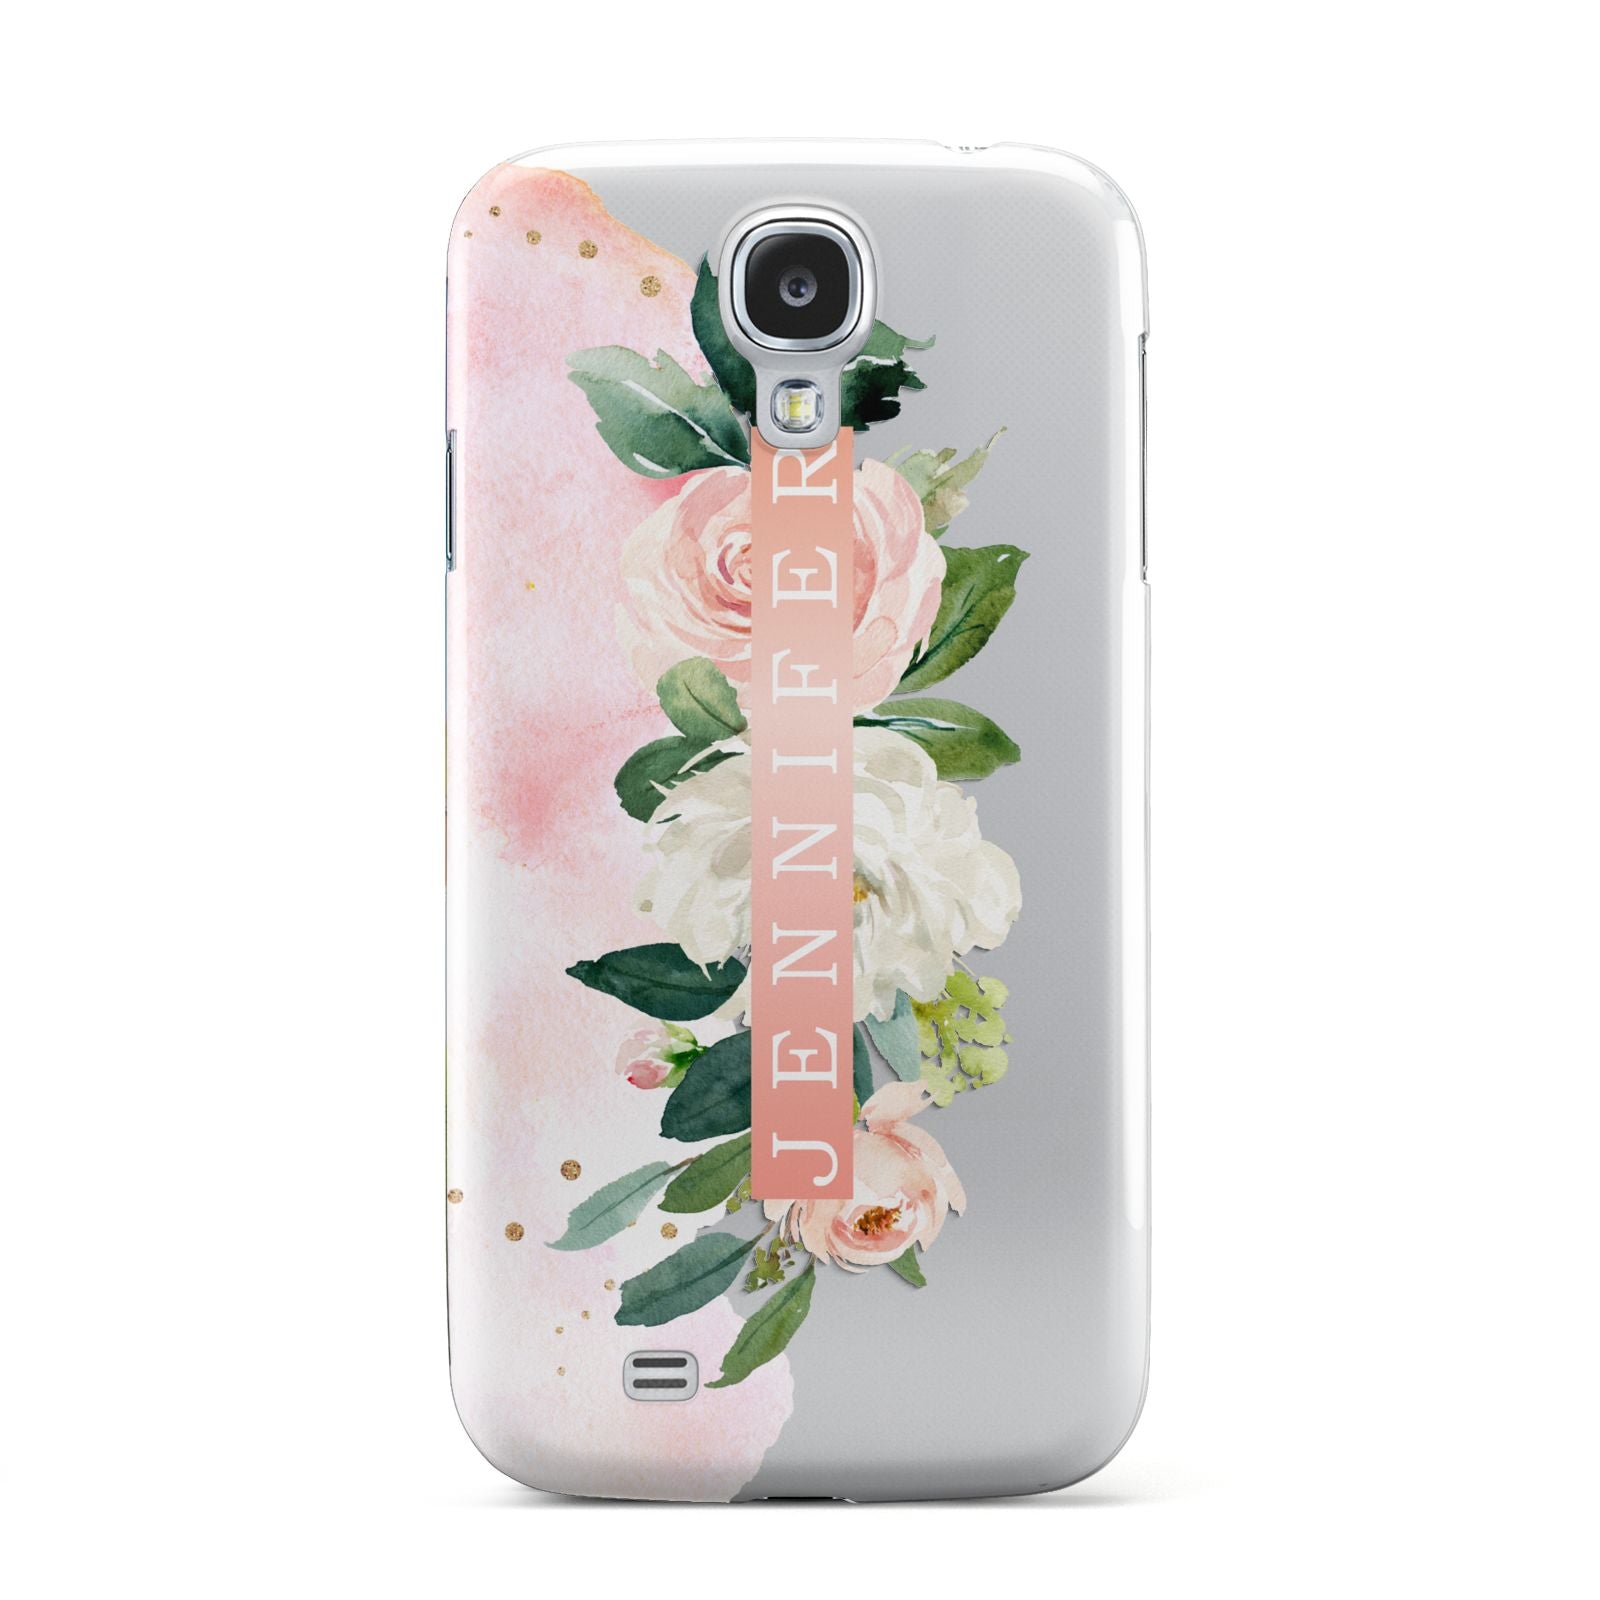 Blush Pink Personalised Name Floral Samsung Galaxy S4 Case